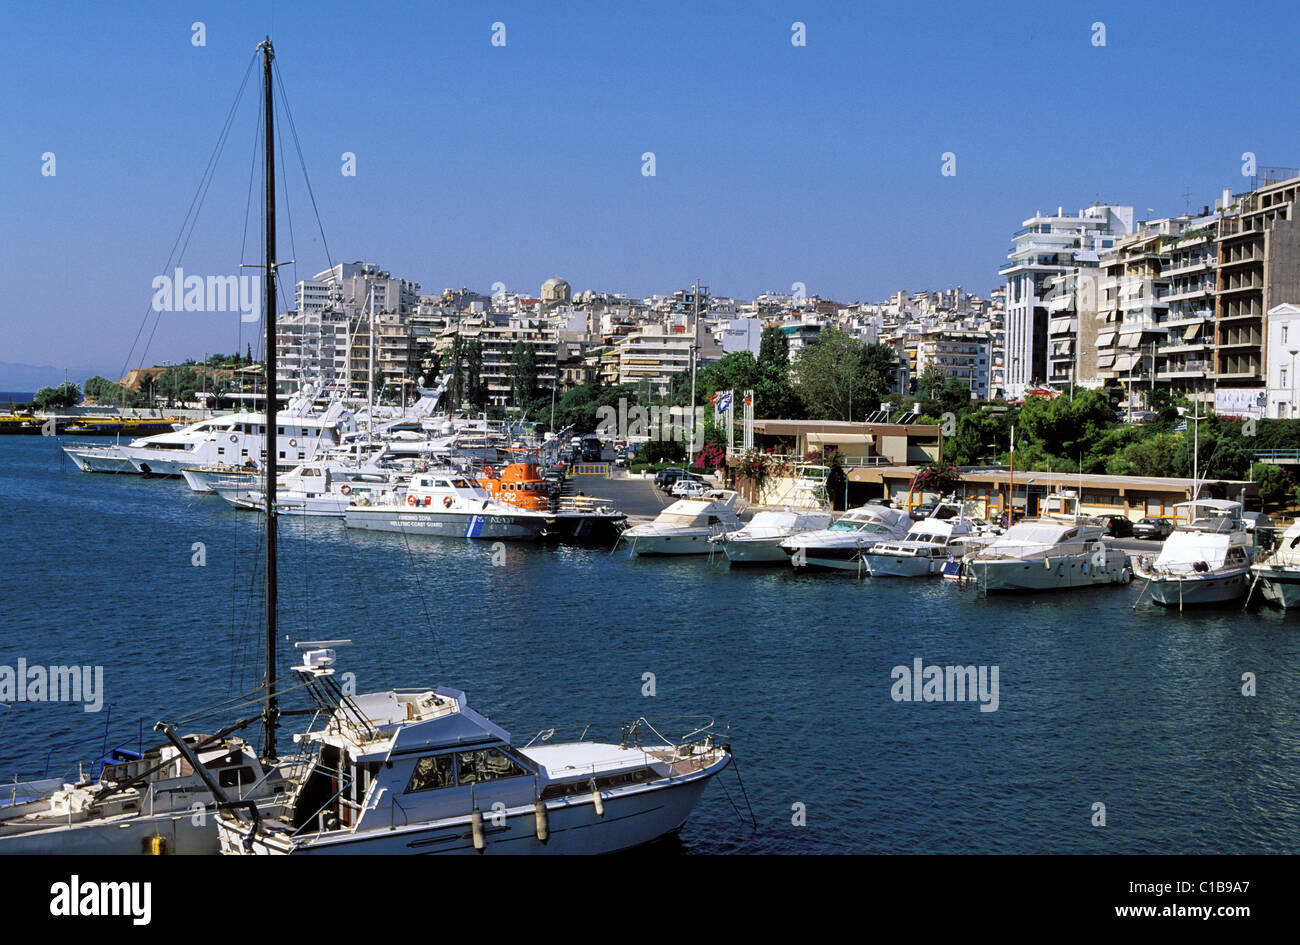 Greece, Athens, Pachalimani, residential district on the seaside Stock Photo